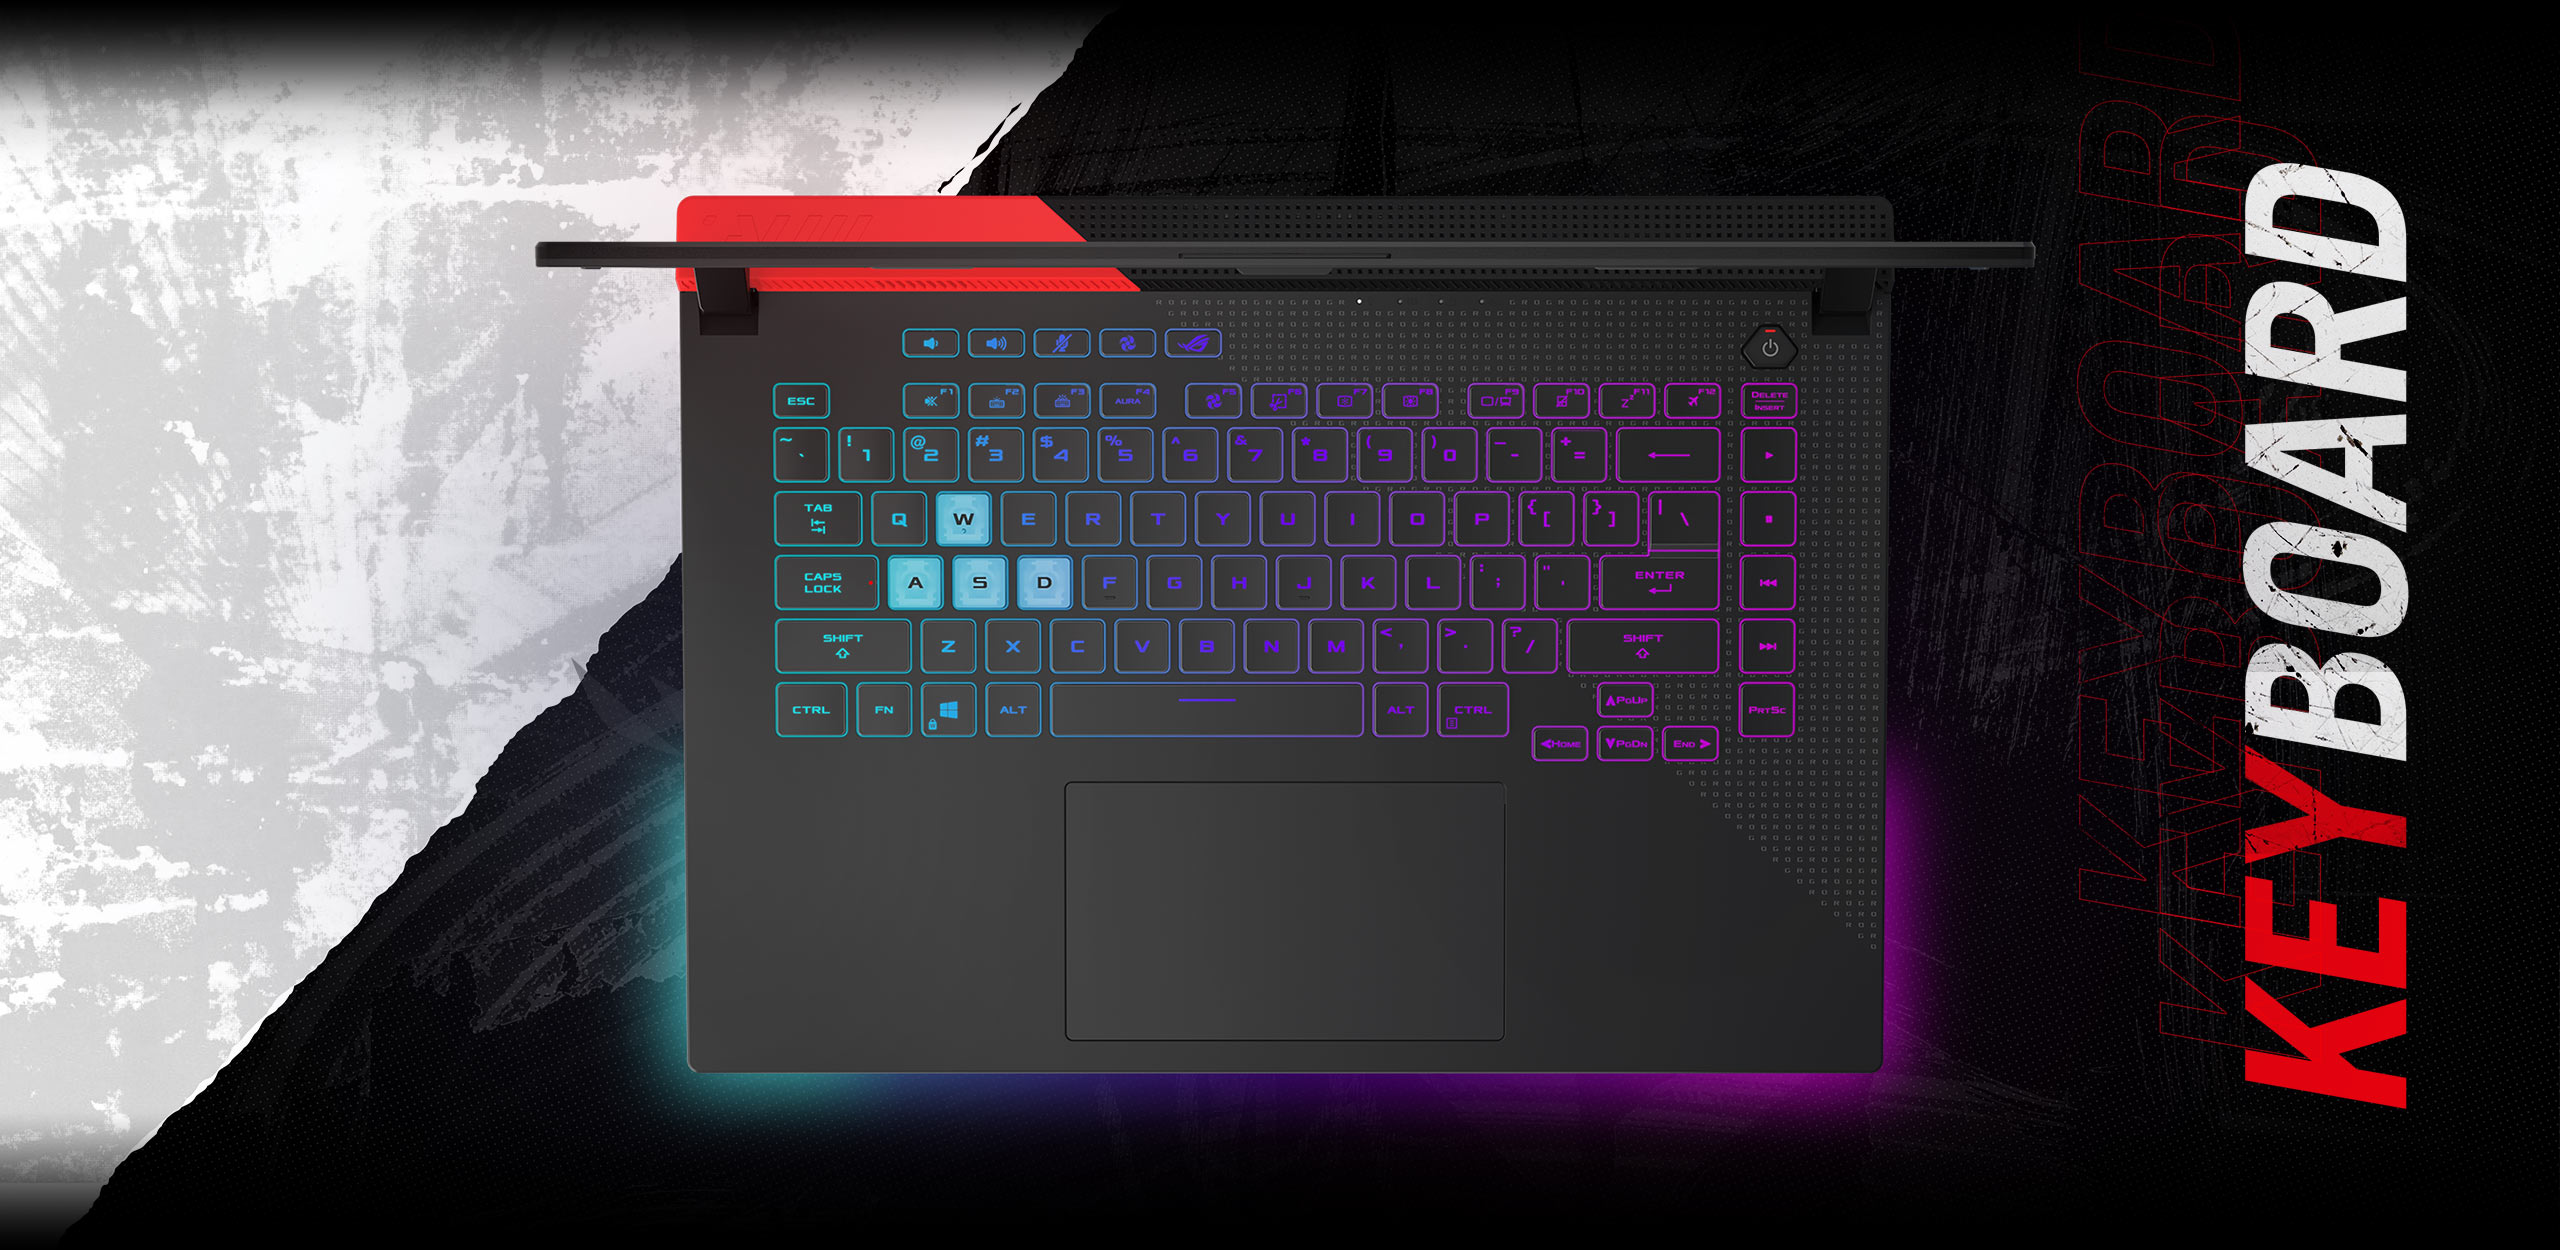 The picture shows the desktop's keyboard with Aura